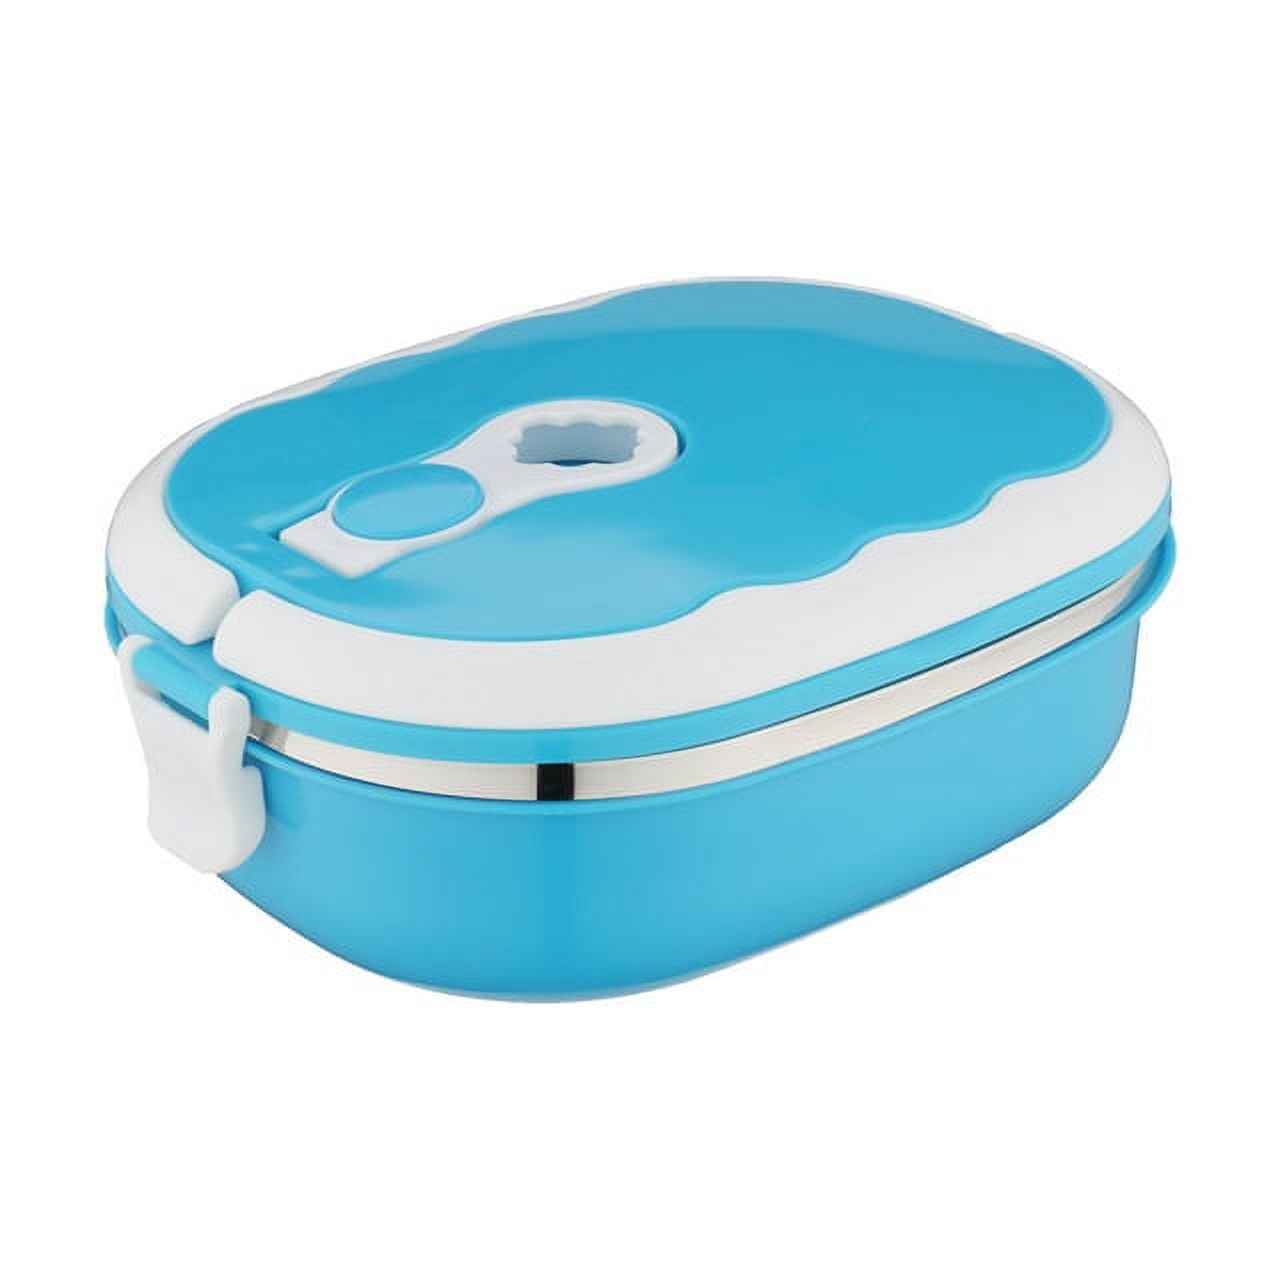 Deals！SDJMa Lunch Box 900ml 1 Layer Thermal Insulated Hot Food Lunch Containers Portable Stackable Stainless Steel Adult Kids Bento Lunch Box Food Storage for School Office Outdoor Travel